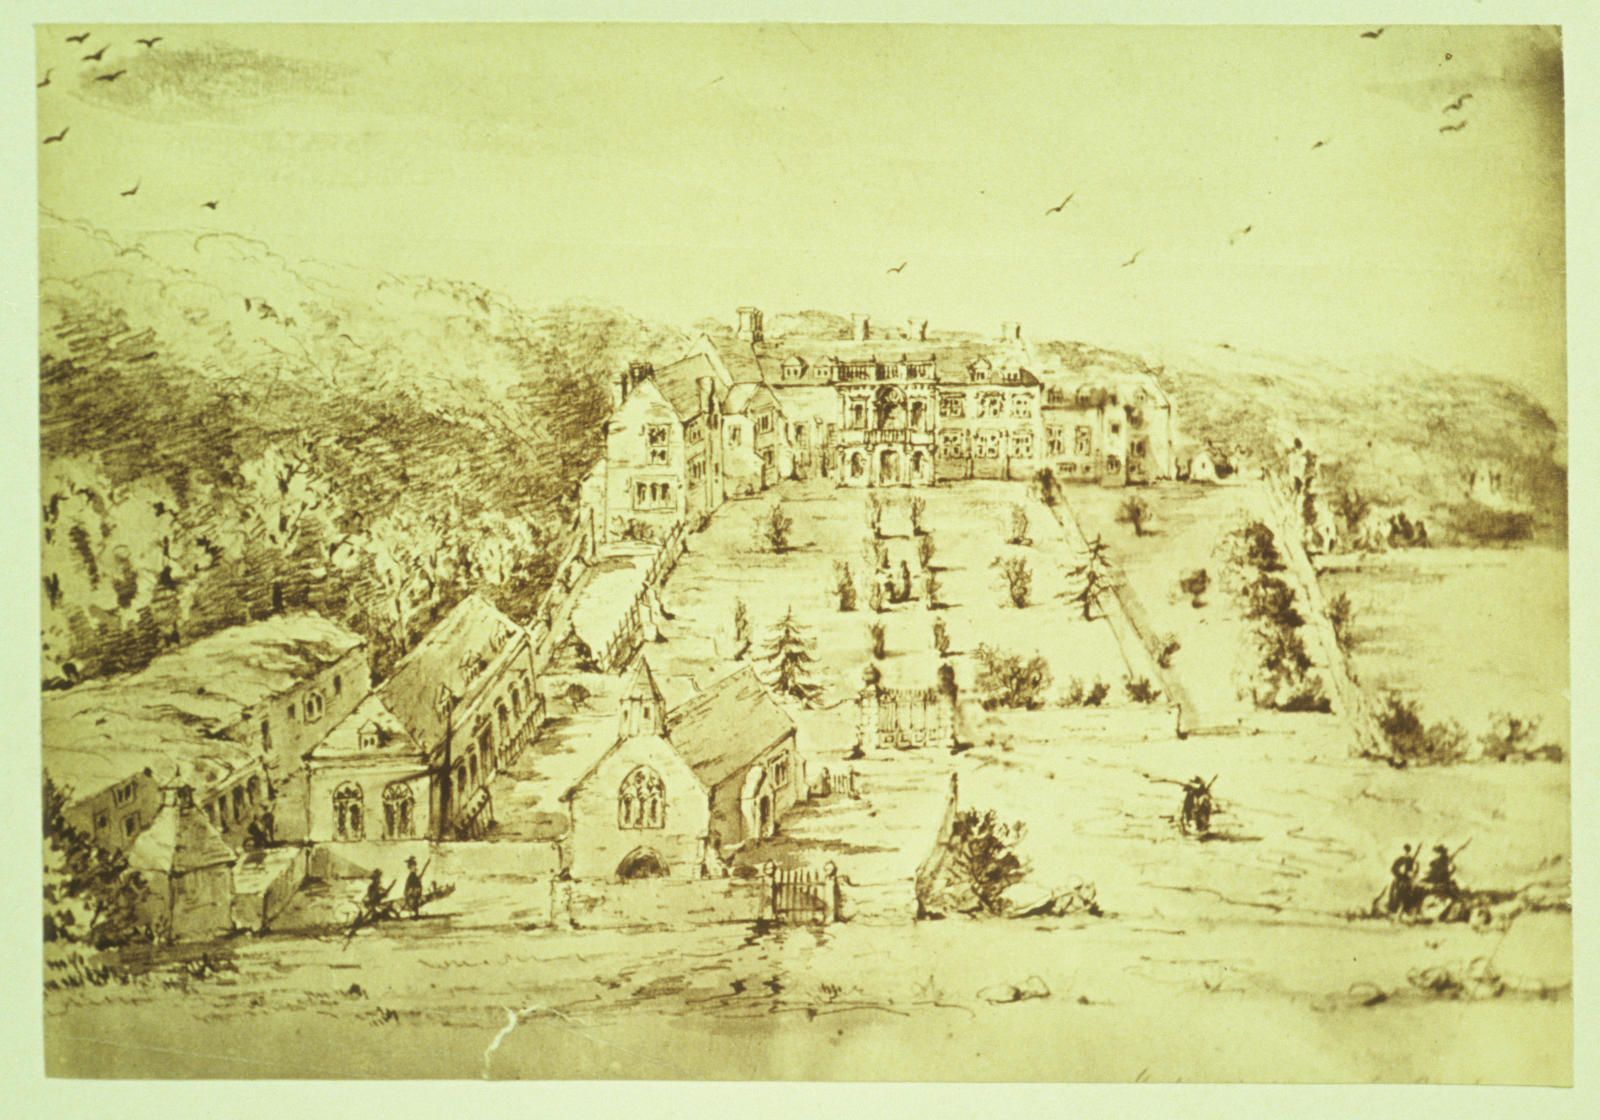 Fig. 7 - Hestecombe chapel as depicted in the foreground of a sketch based on the painting, 'Hestercombe 1700'